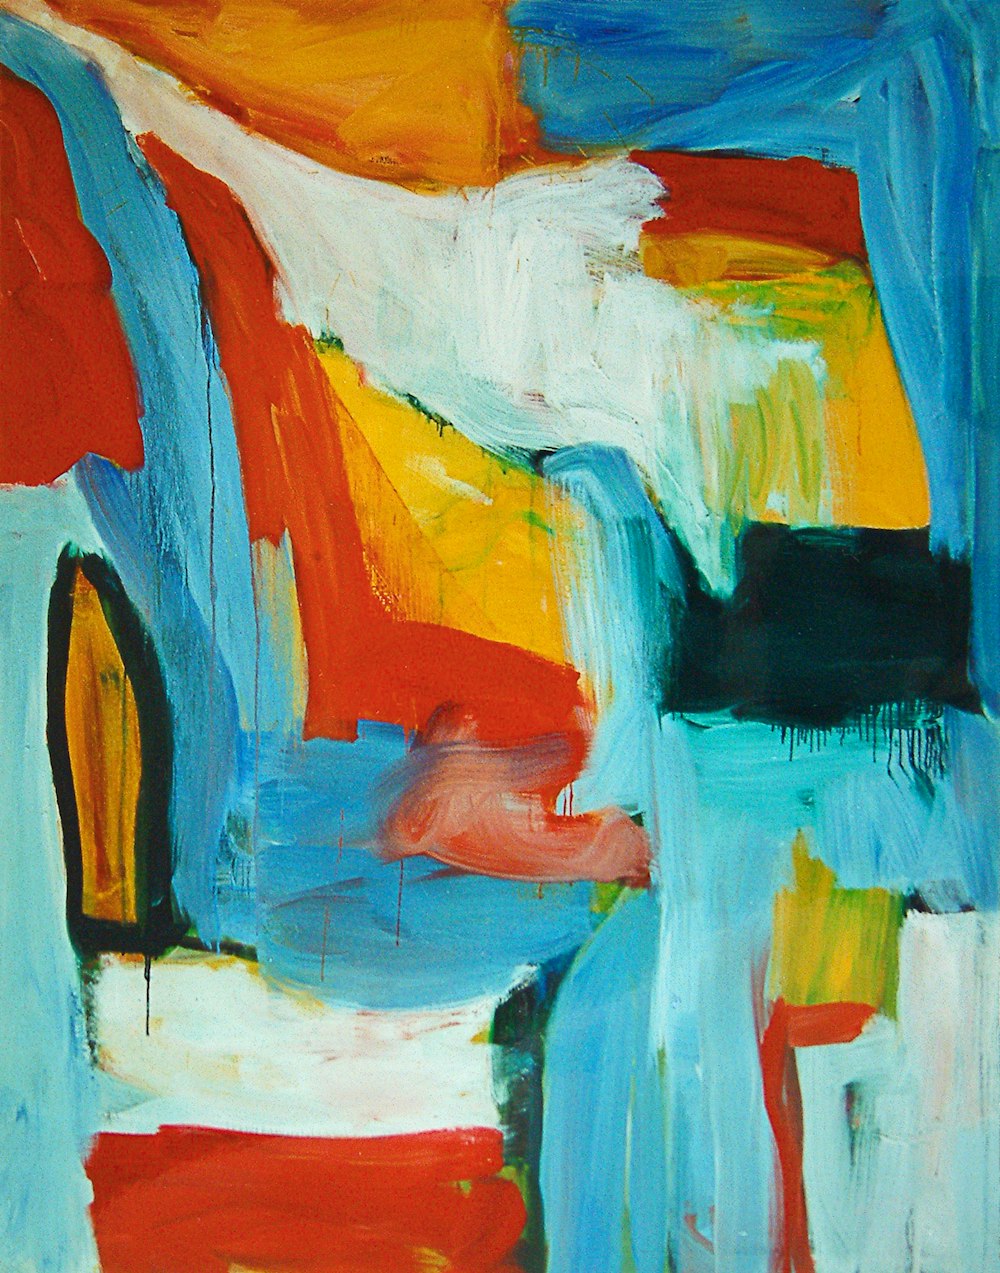 an abstract painting of blue, red, yellow, and orange